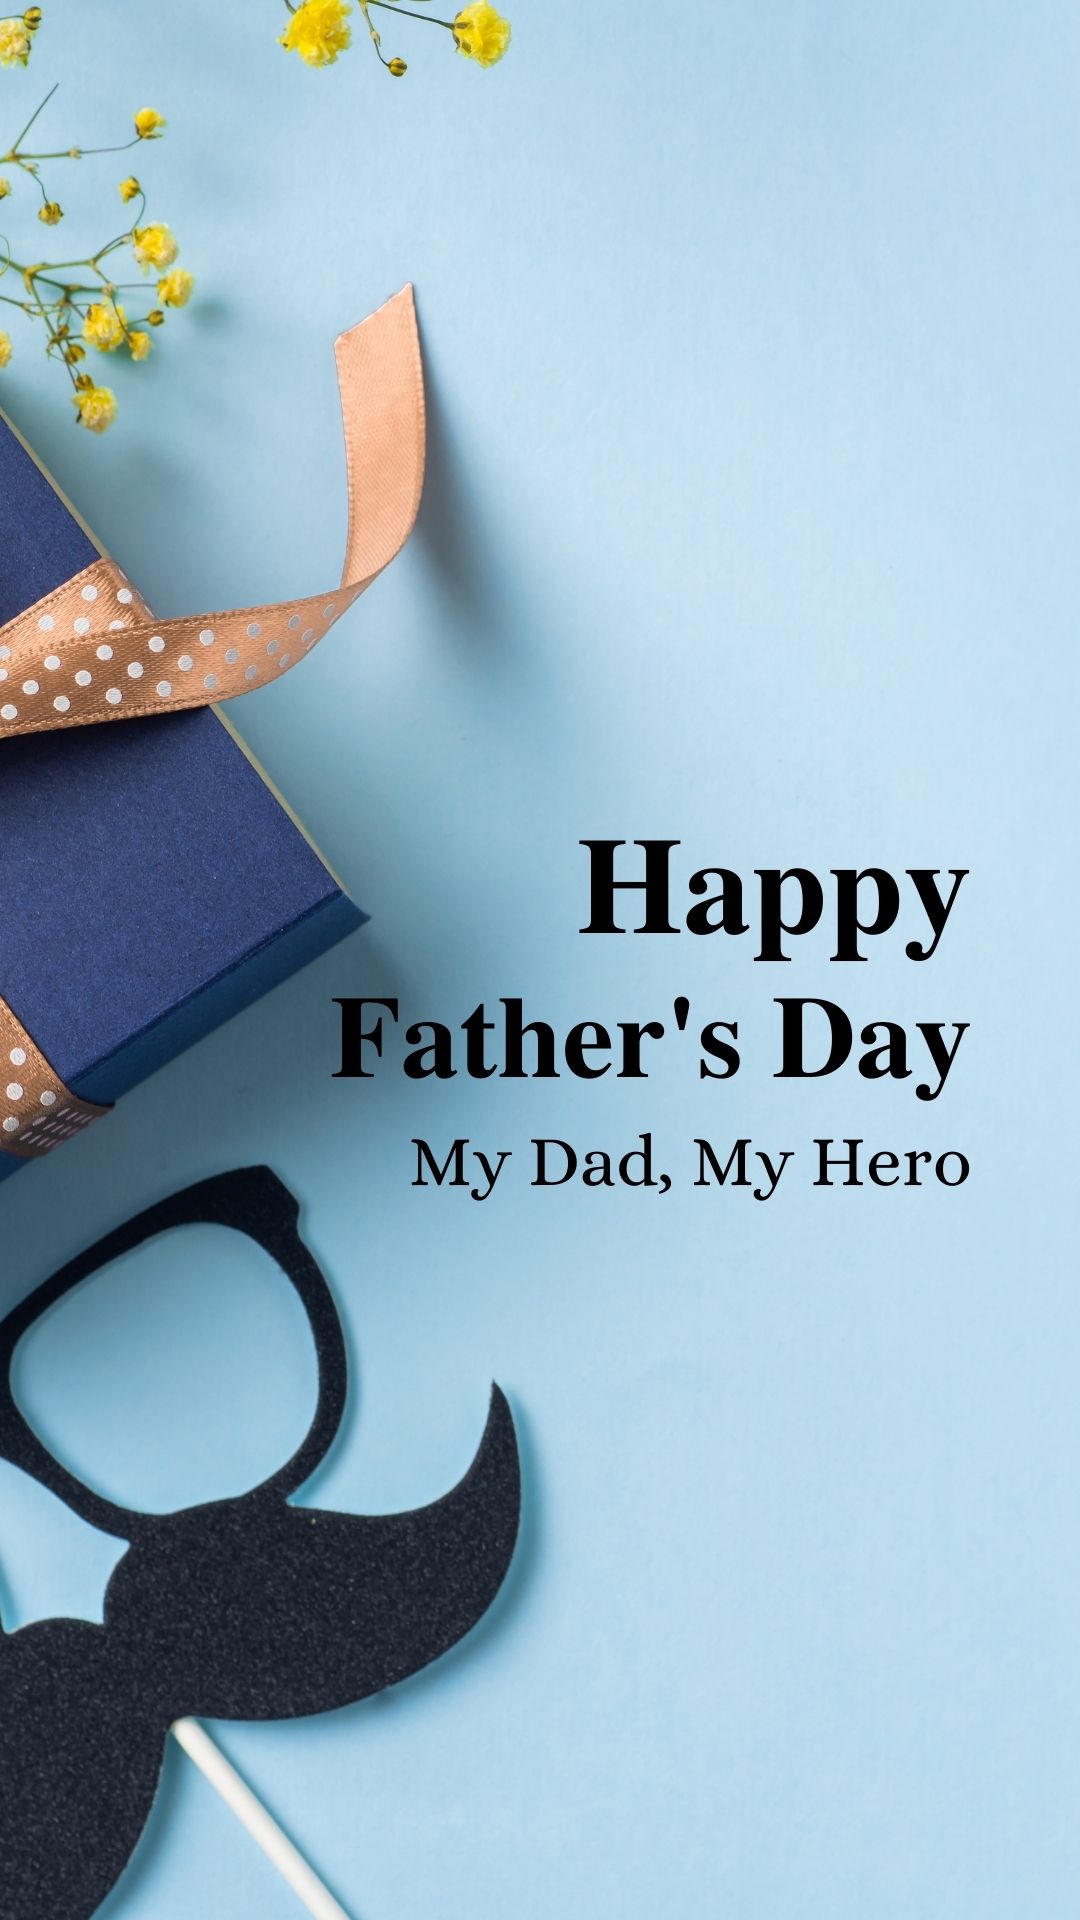 best happy father's day wishes images for instagram story (27)